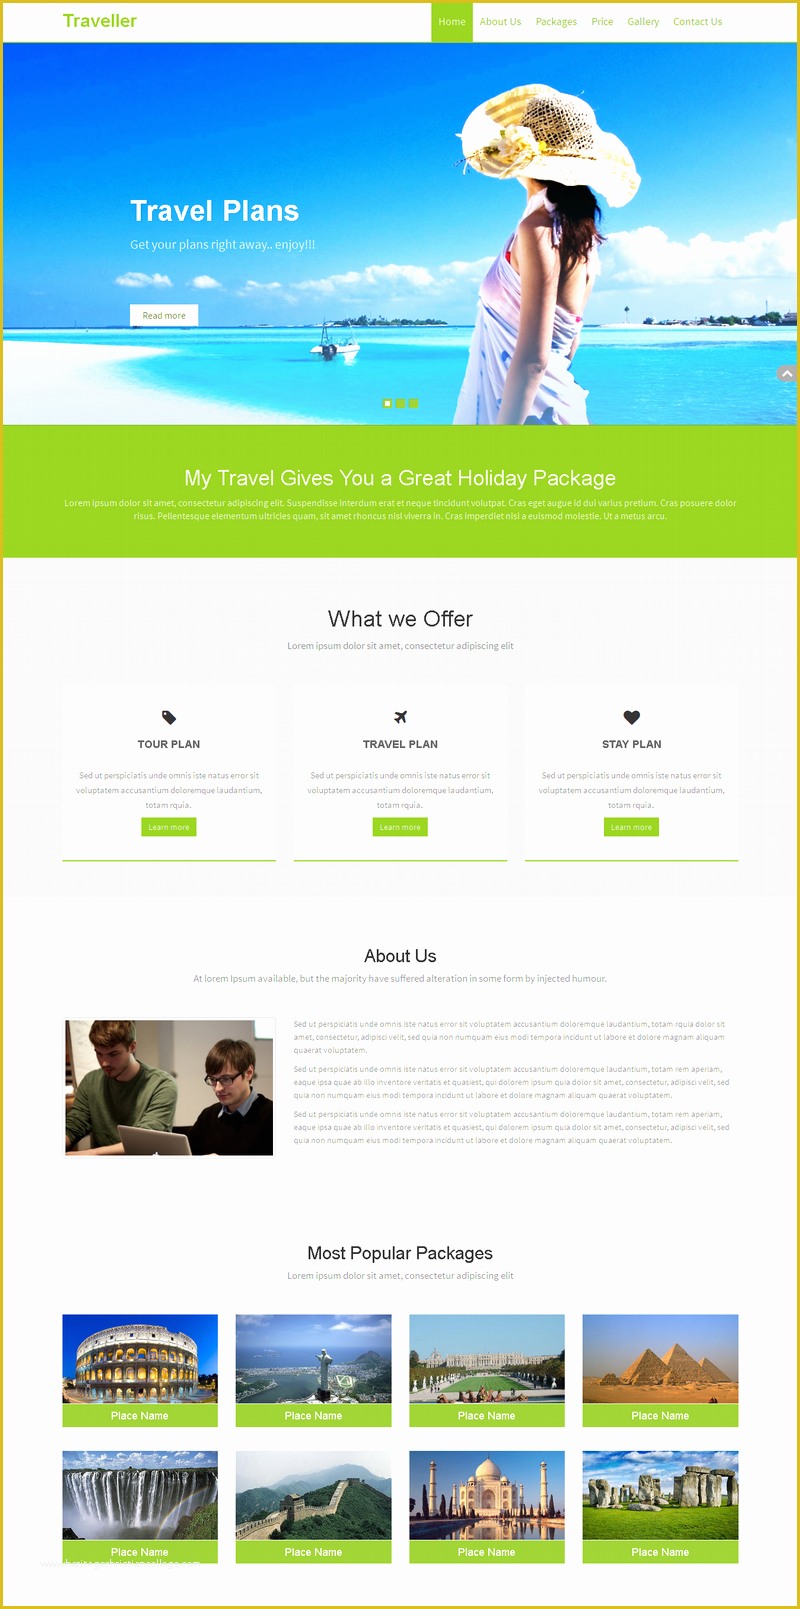 Bootstrap Responsive Templates Free Download Of 10 Best Free Website HTML5 Templates – January 2015